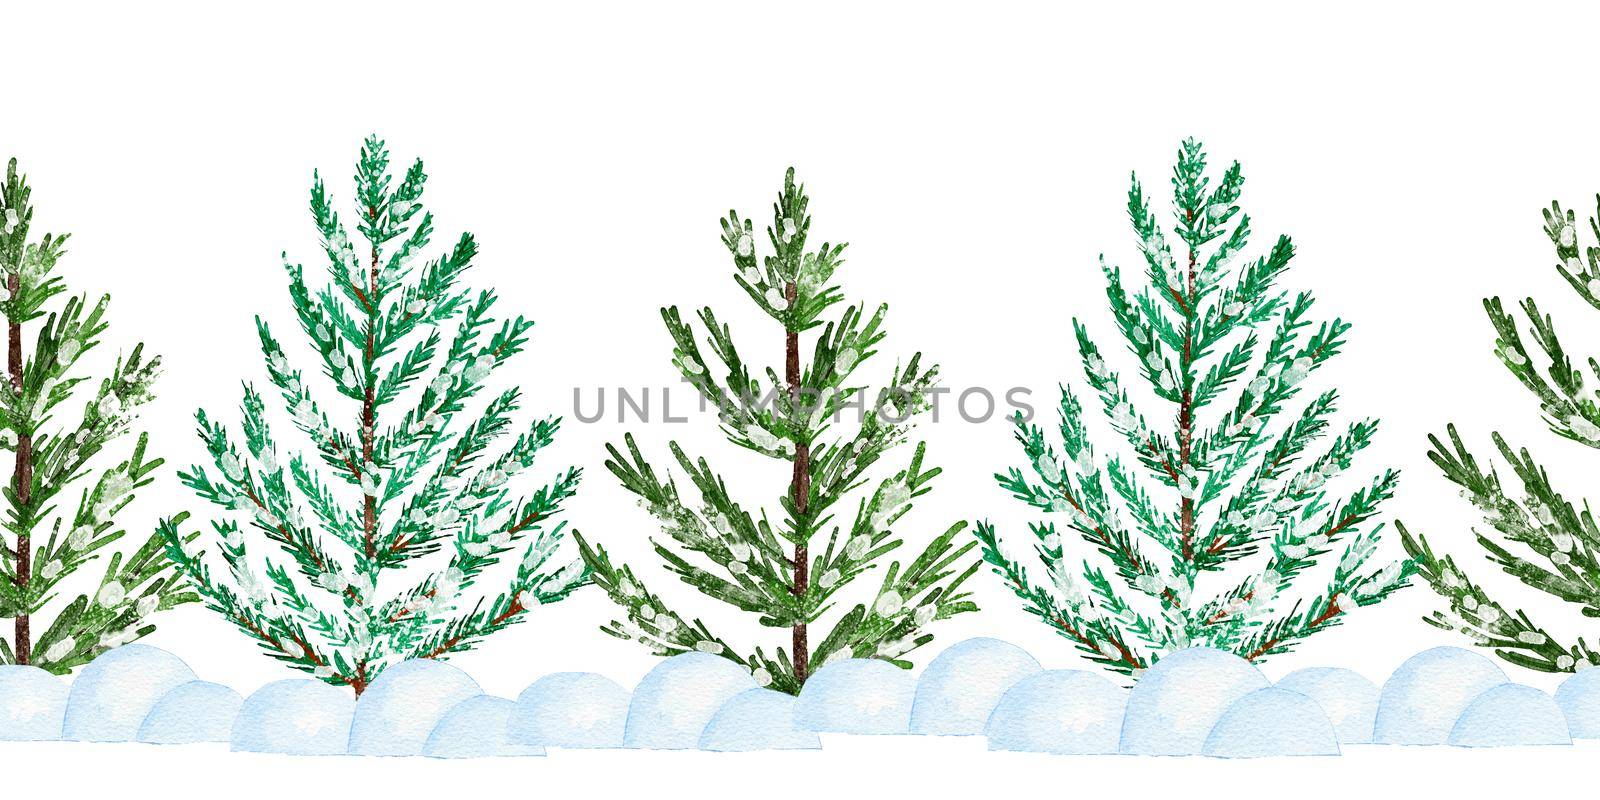 Watercolor seamless hand drawn border with Christmas trees. Winter december forest wood woodland decor, pine fir conifer branches in snow ornaments, horizontal clipart frame. by Lagmar